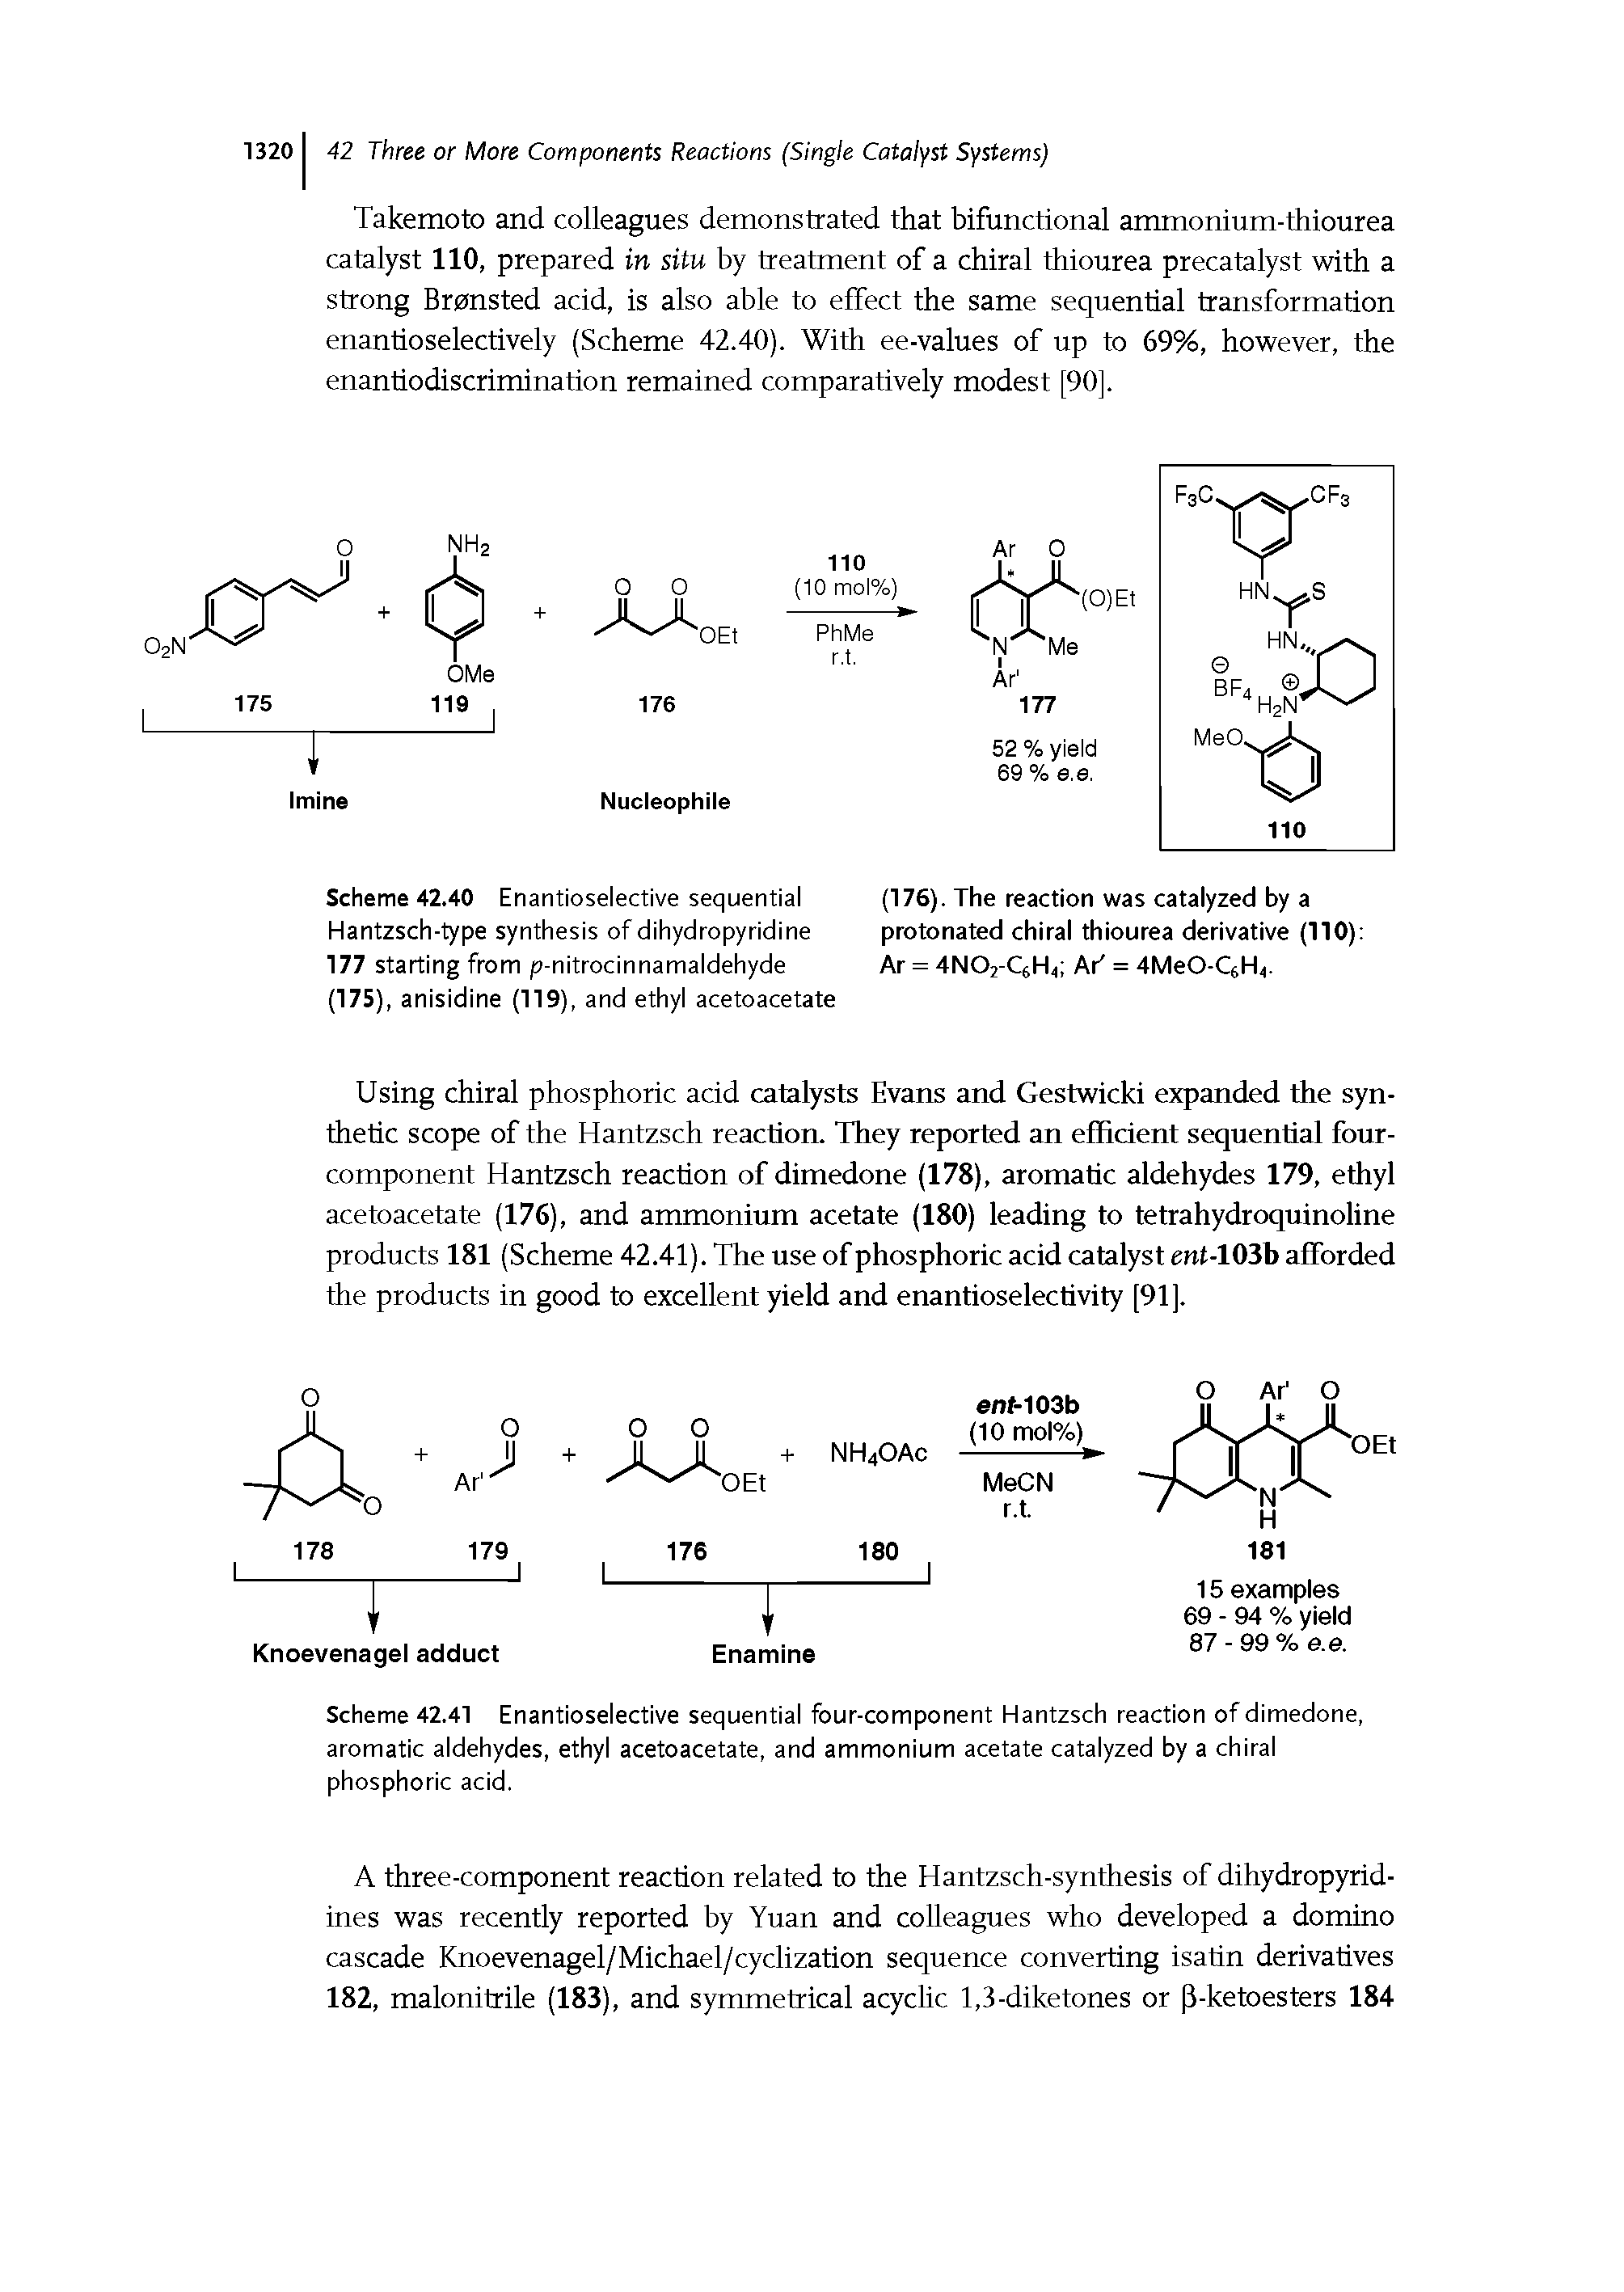 Scheme 42.40 Enantioselective sequential Hantzsch-type synthesis of dihydropyridine 177 starting from p-nitrocinnamaldehyde (175), anisidine (119), and ethyl acetoacetate...